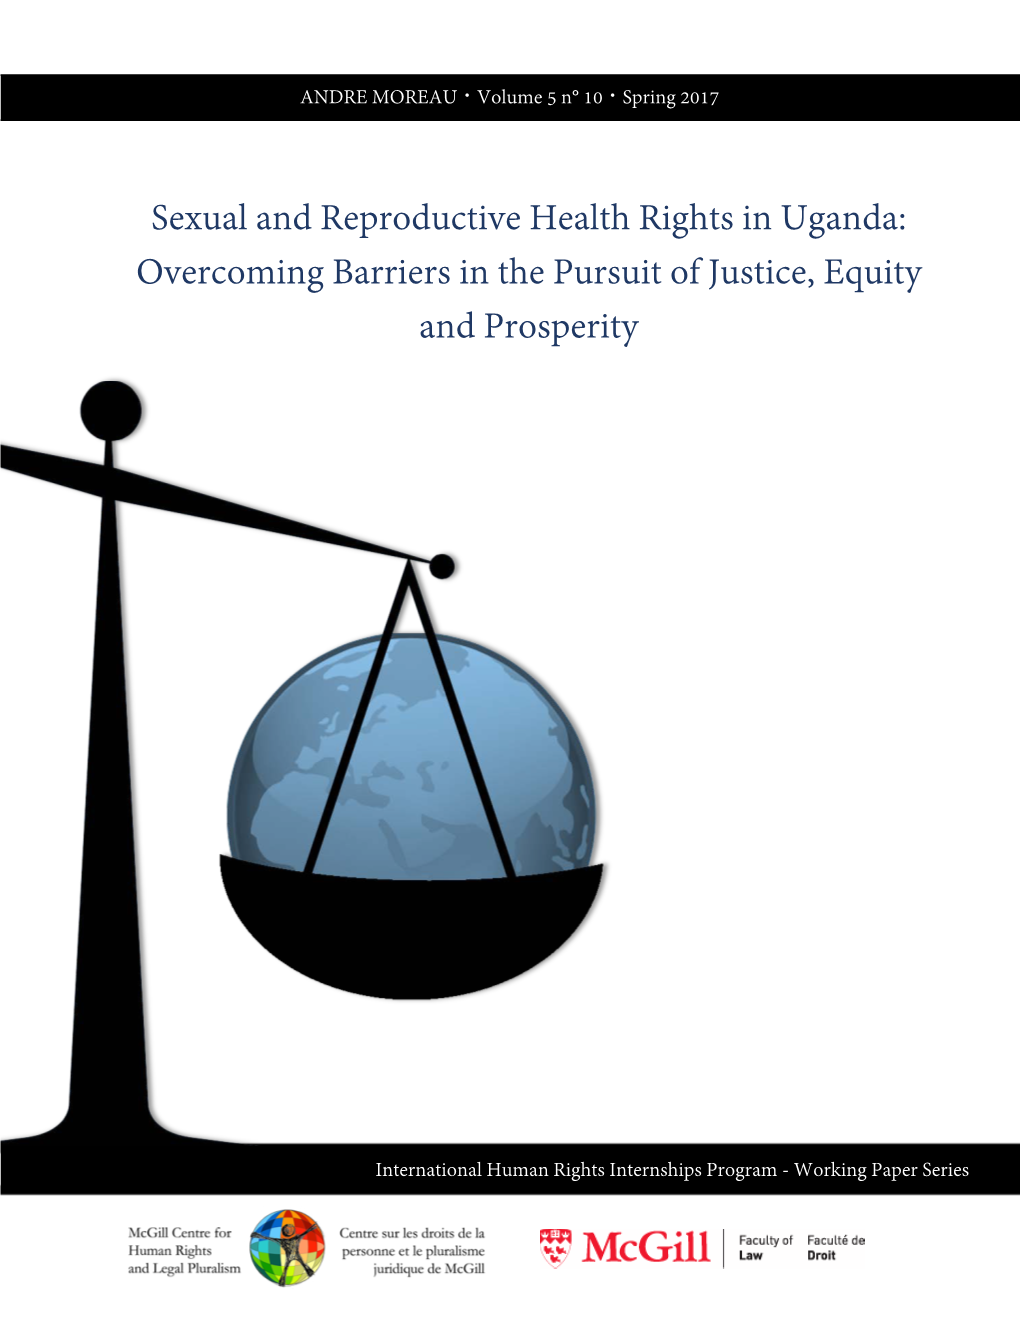 Sexual and Reproductive Health Rights in Uganda: Overcoming Barriers in the Pursuit of Justice, Equity